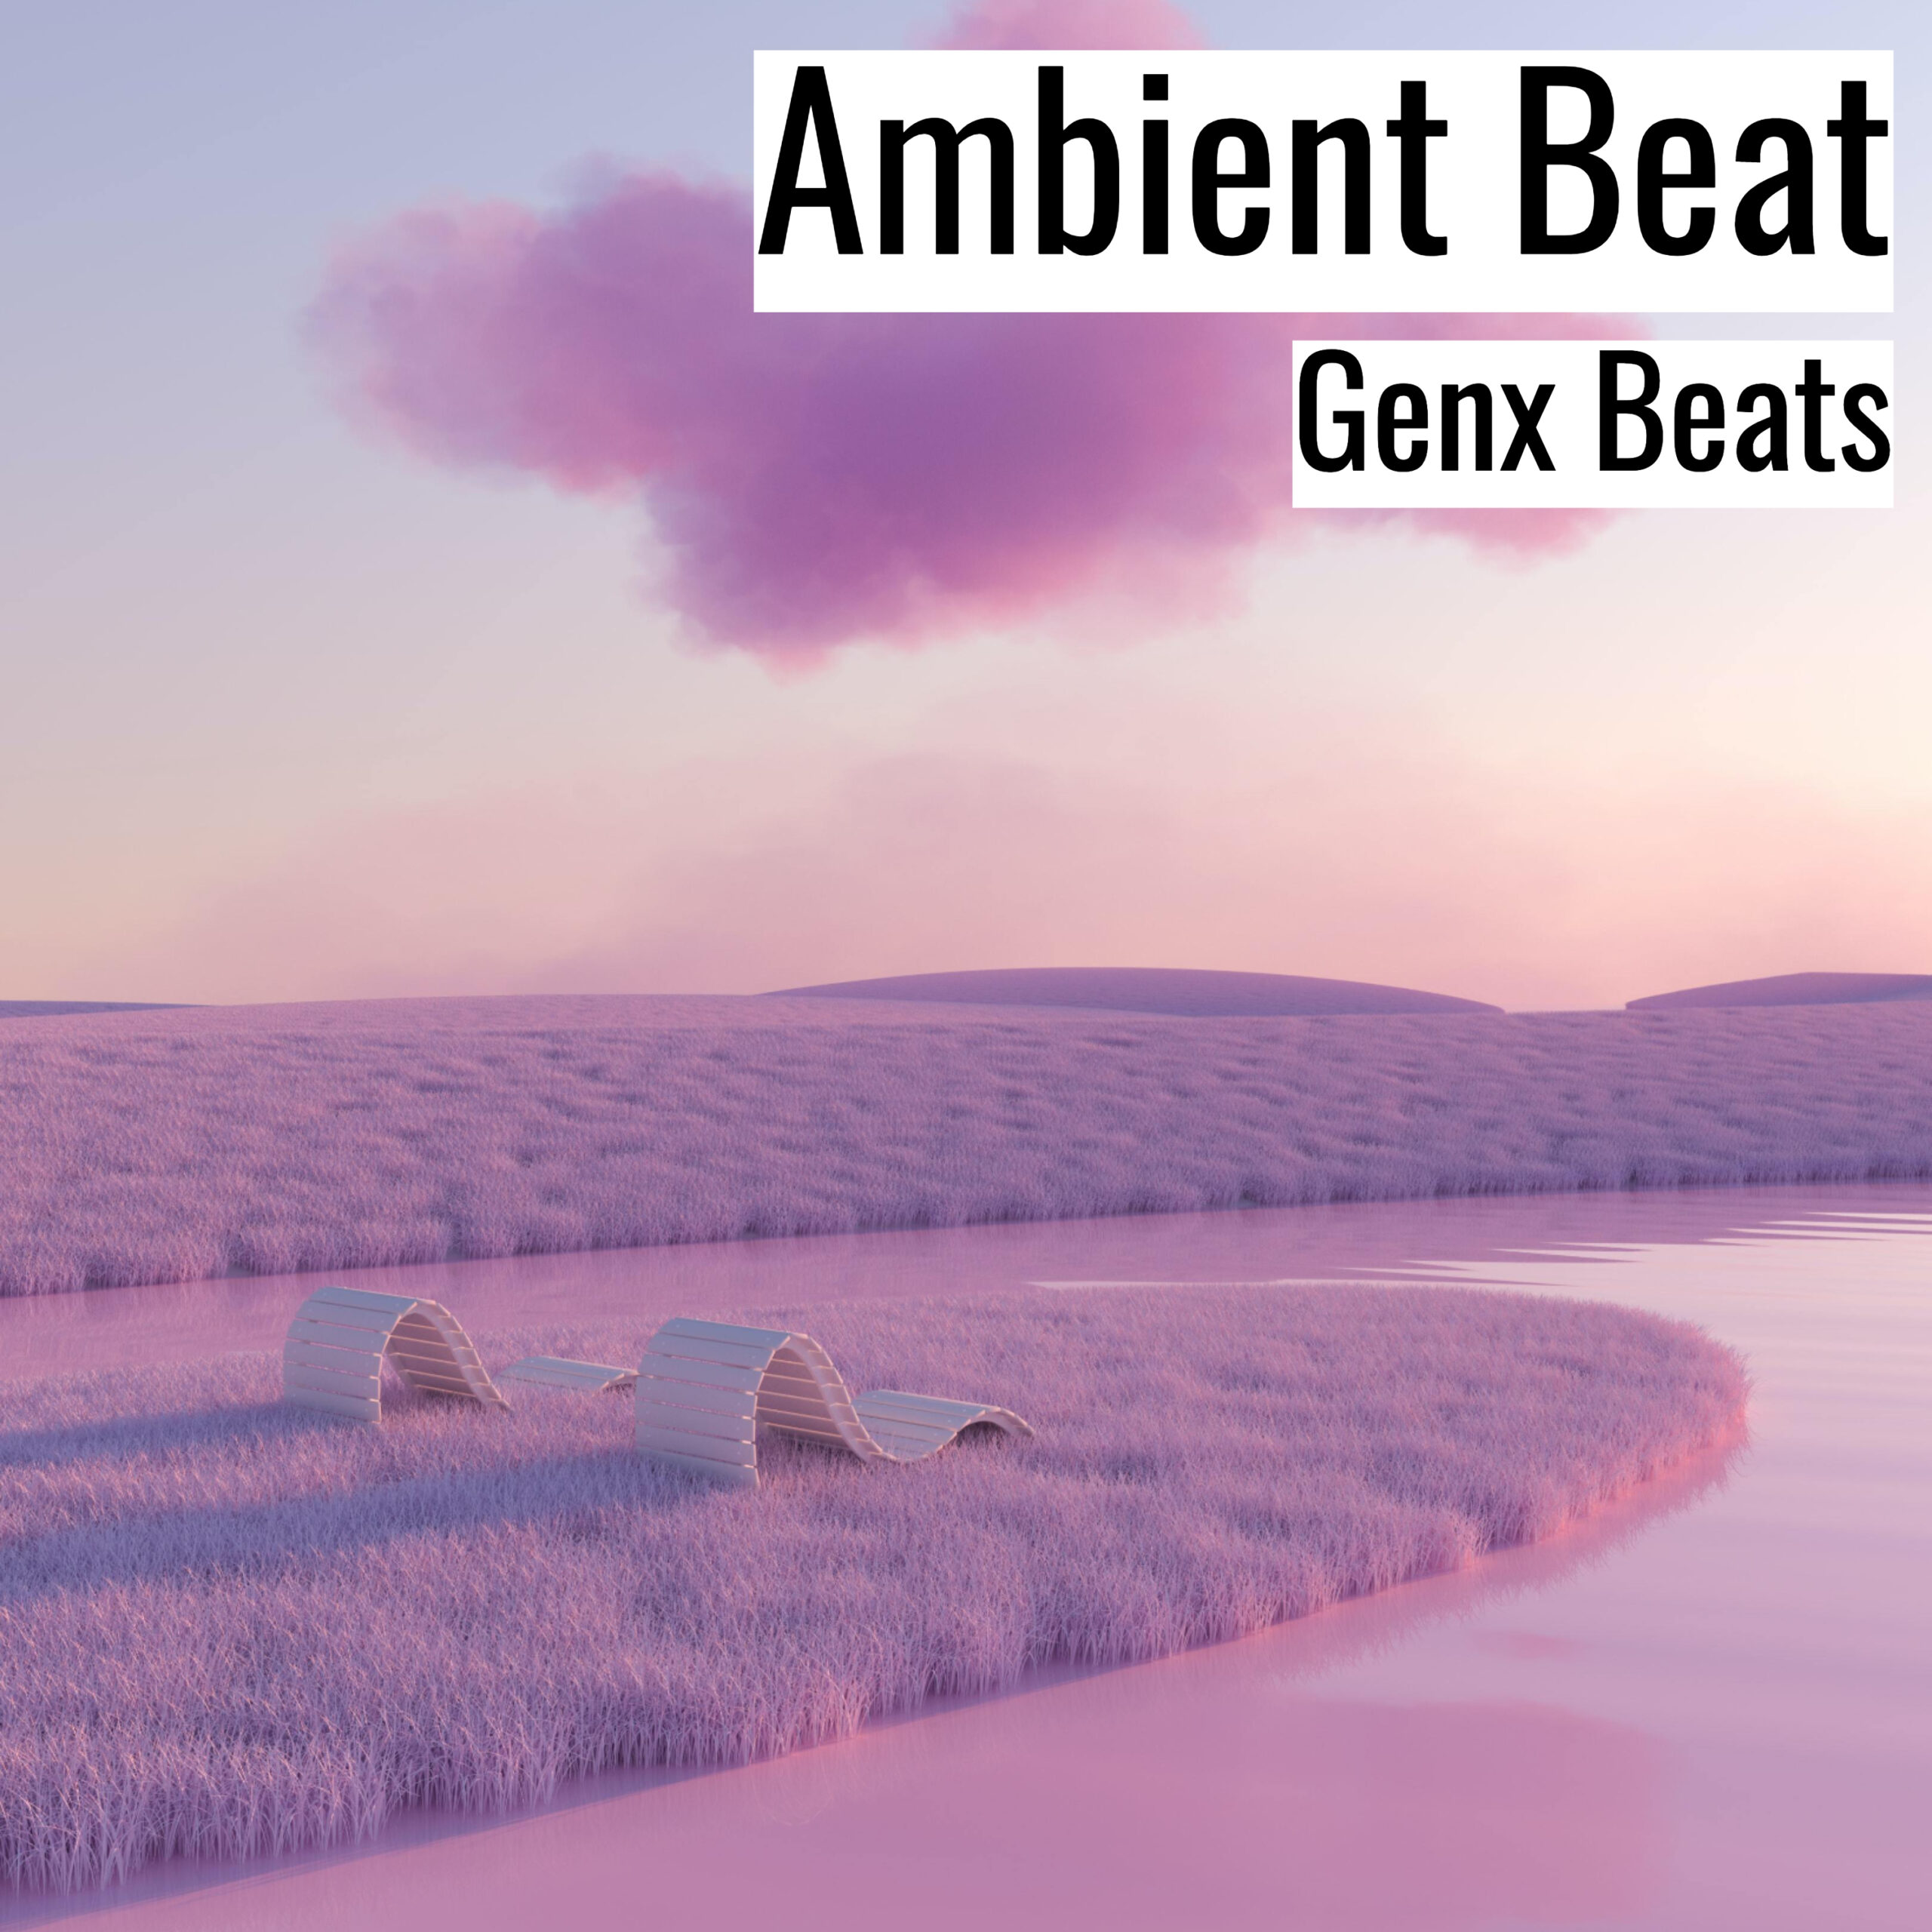 Ambient Beat scaled